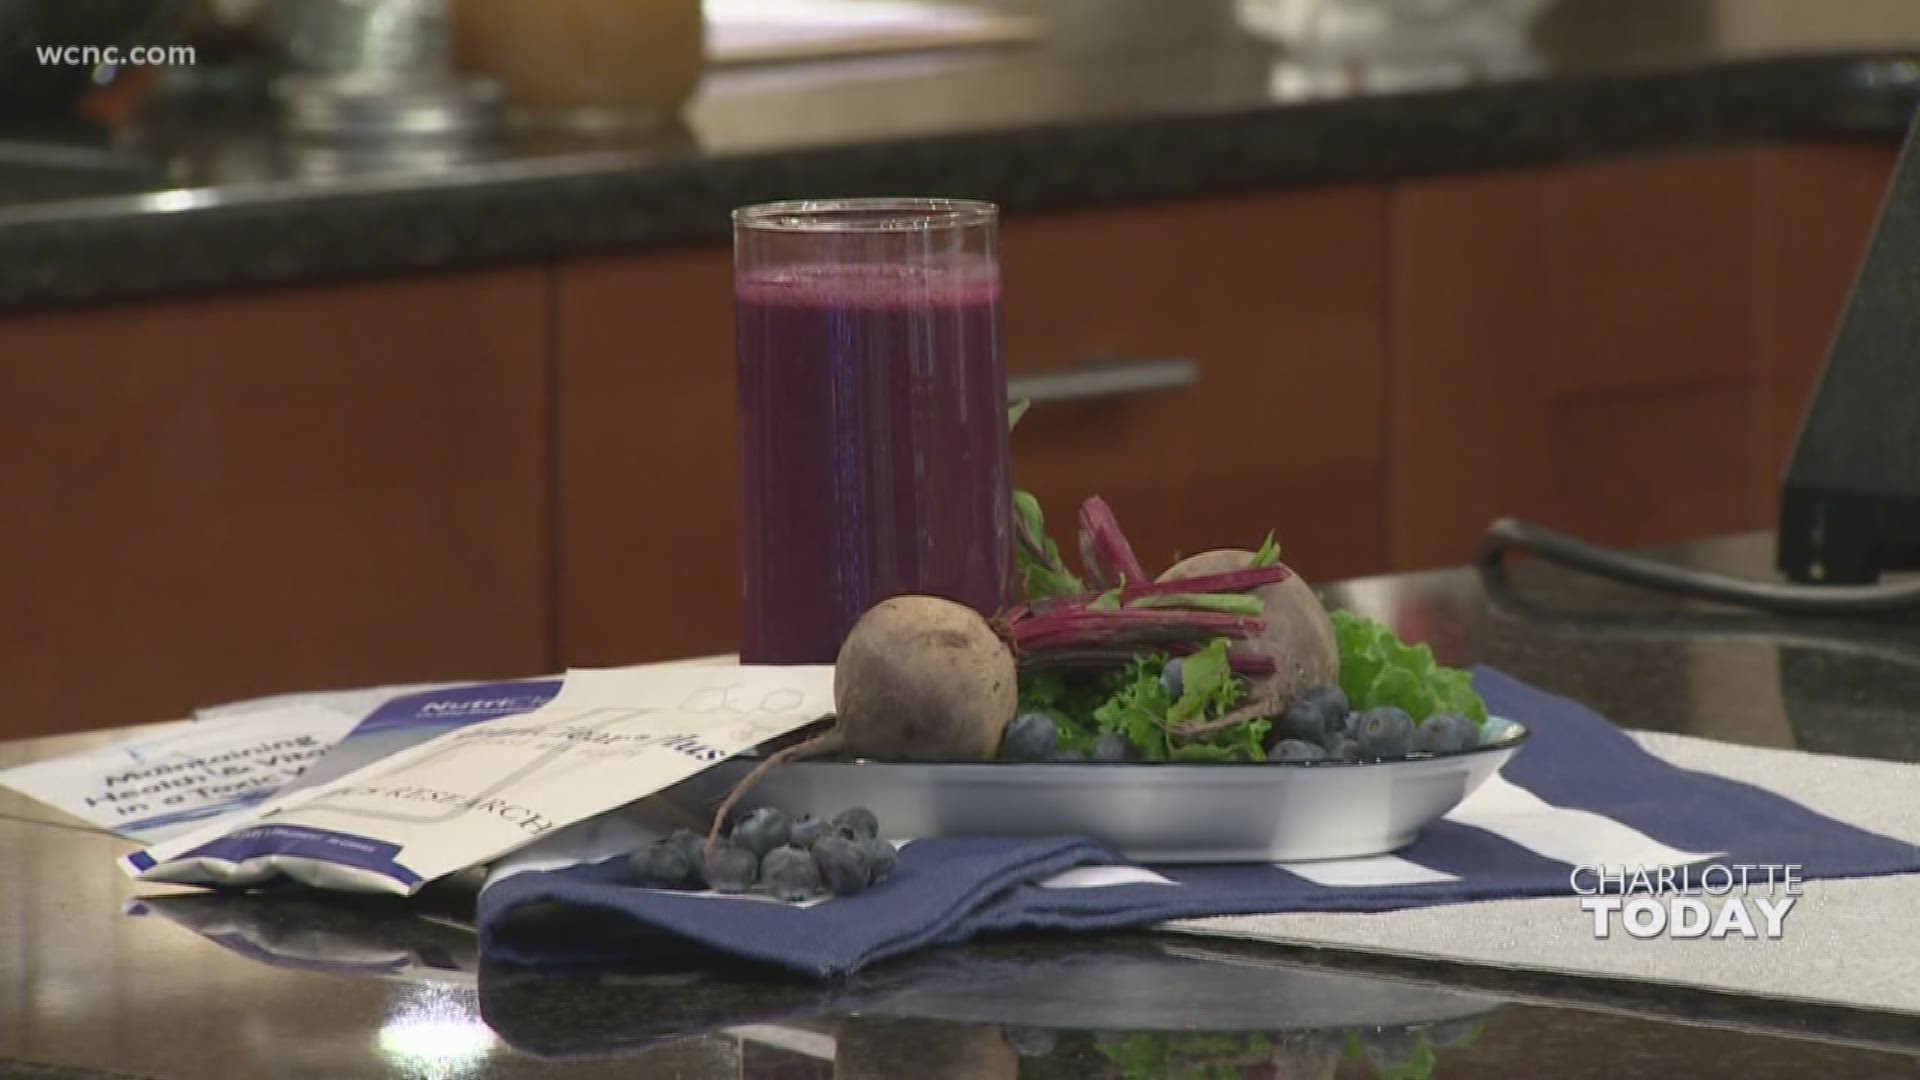 Chef Carol Green shows us how to re-set our diet